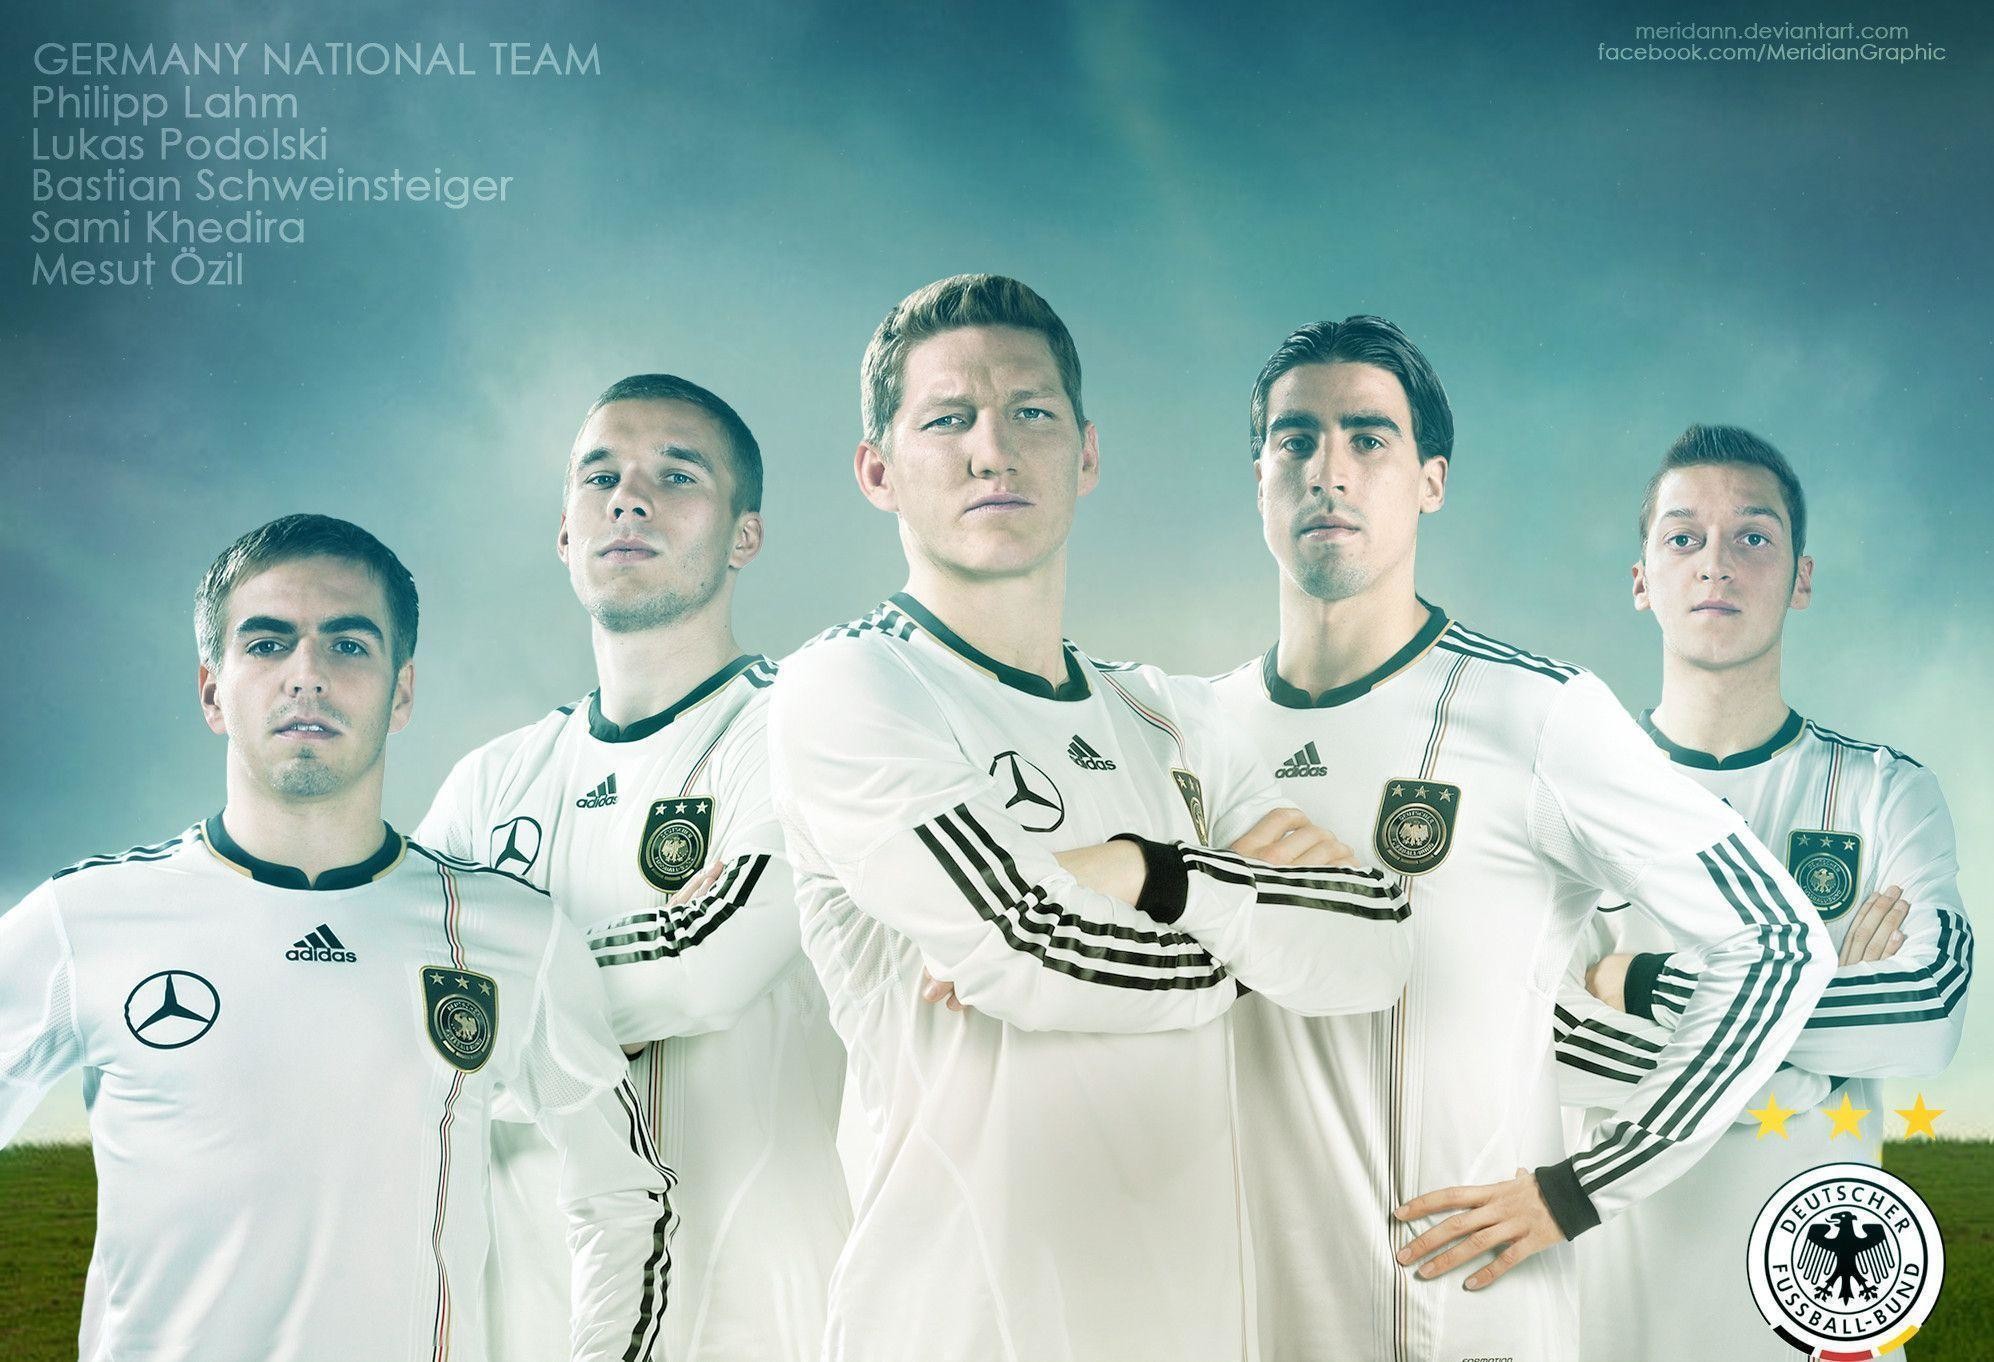 1994x1362 Spain National Team Wallpapers 2015 - Wallpaper Cave